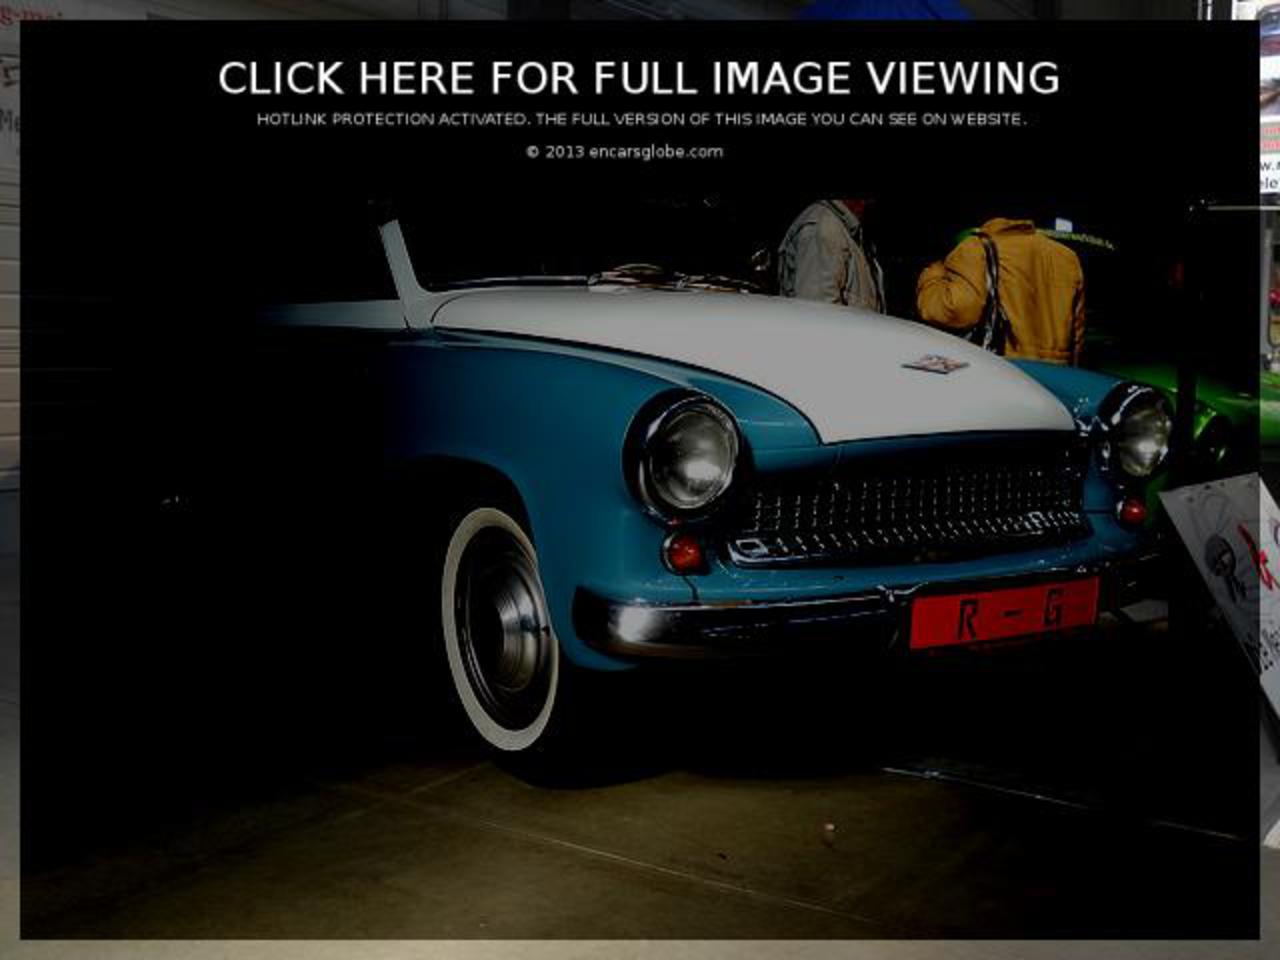 Wartburg 1000-Coup 311 Photo Gallery: Photo #10 out of 11, Image ...